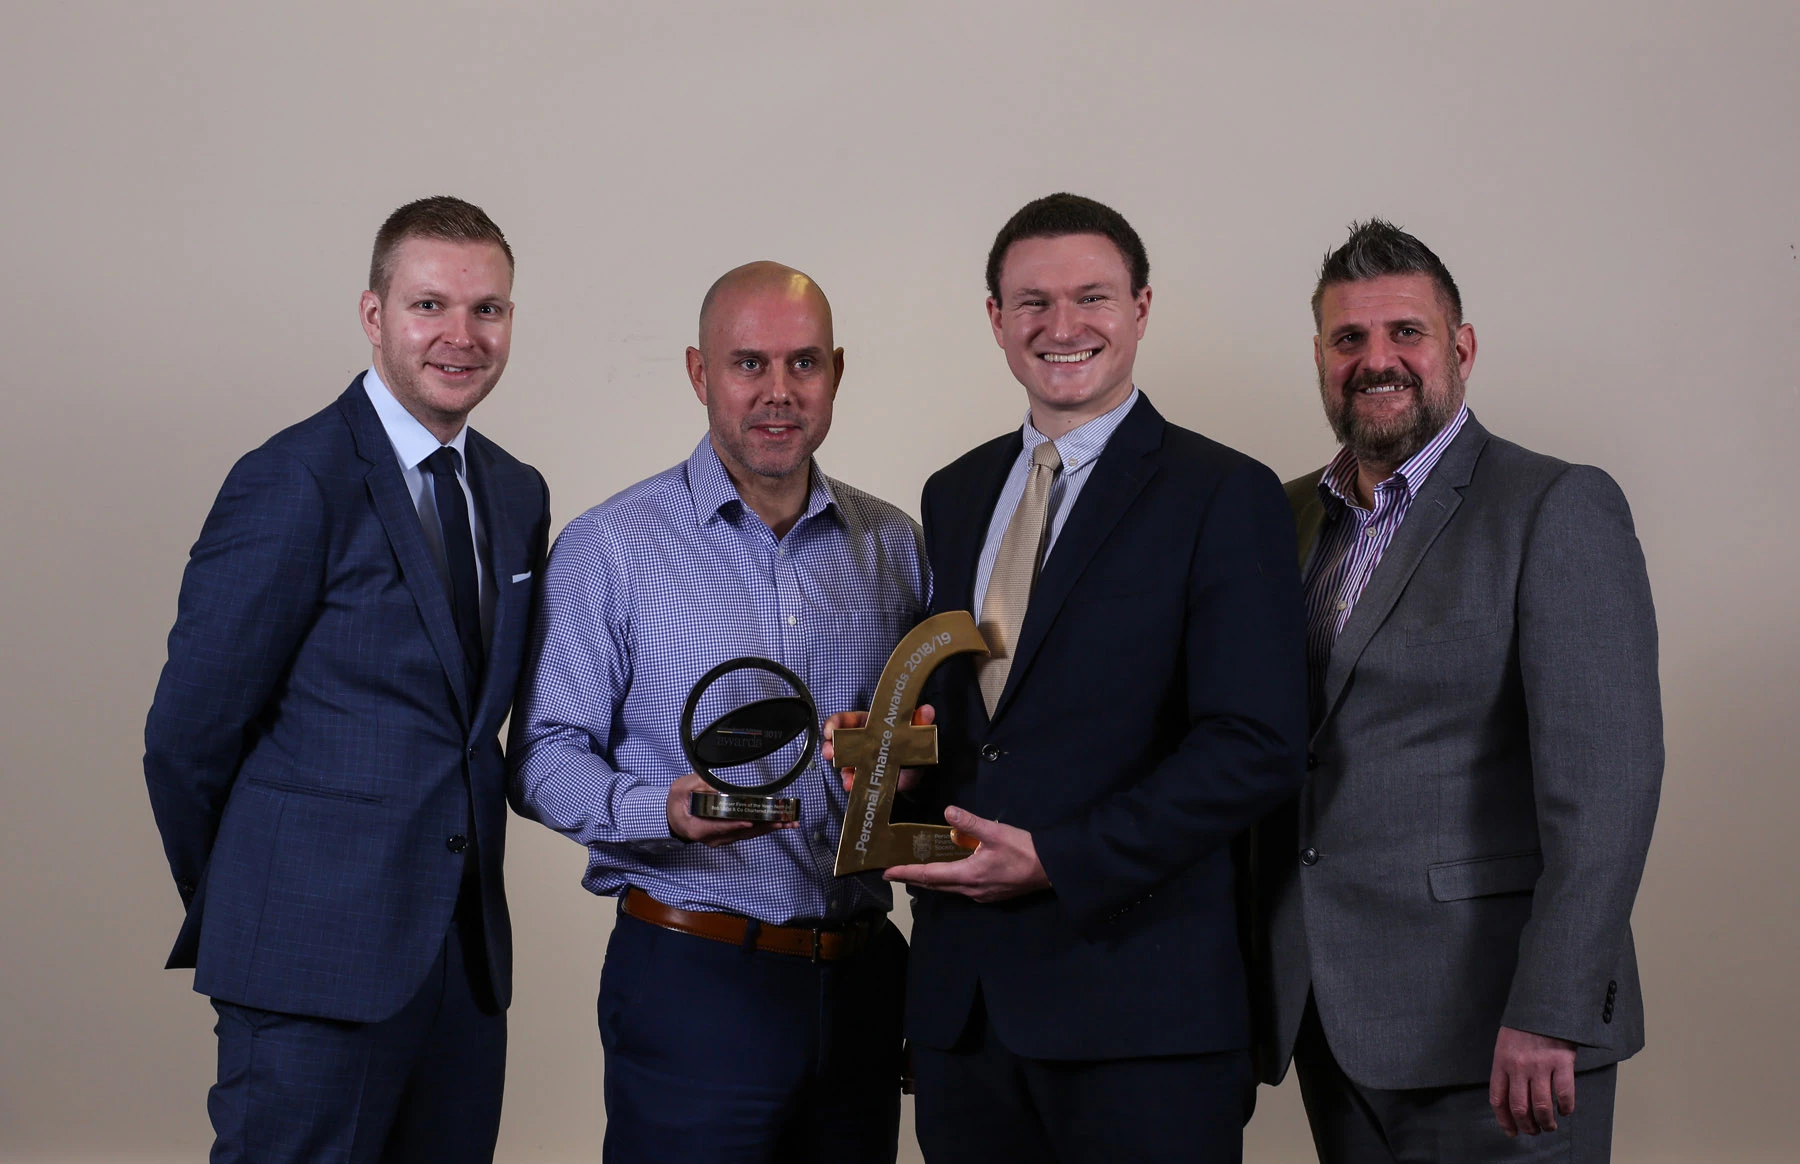 Mortgage adviser Matthew Grayson and IFAs Chris Donnelly, Robert Little and Martin Cockerill with the North East Advisor Firm of the Year and Robert’s Investment Advice Specialist of the Year awards